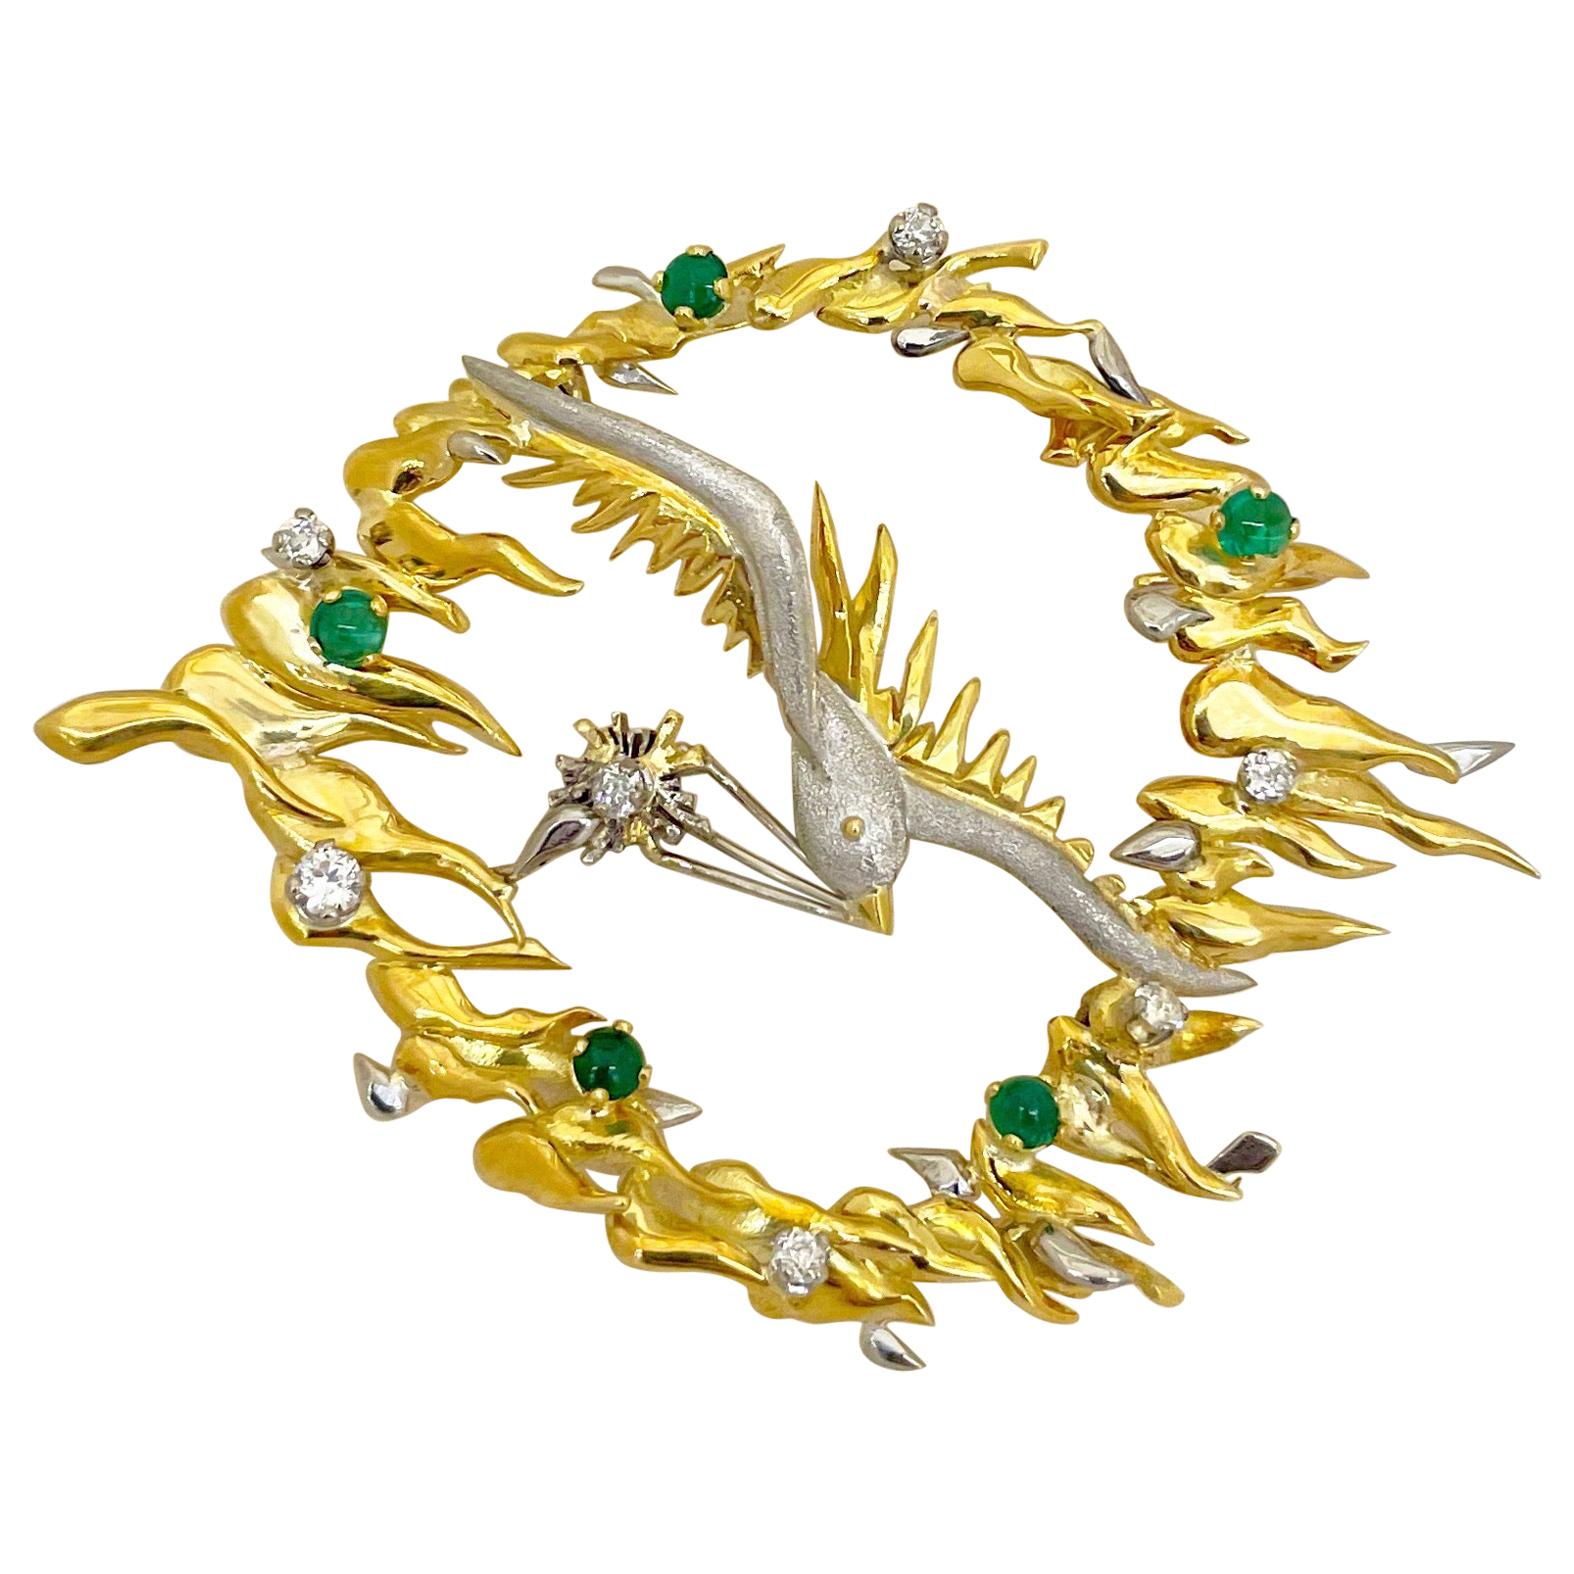 18KT Yellow and White Gold Bird Brooch with 1.20Ct. Emerald & 0.75Ct. Diamond